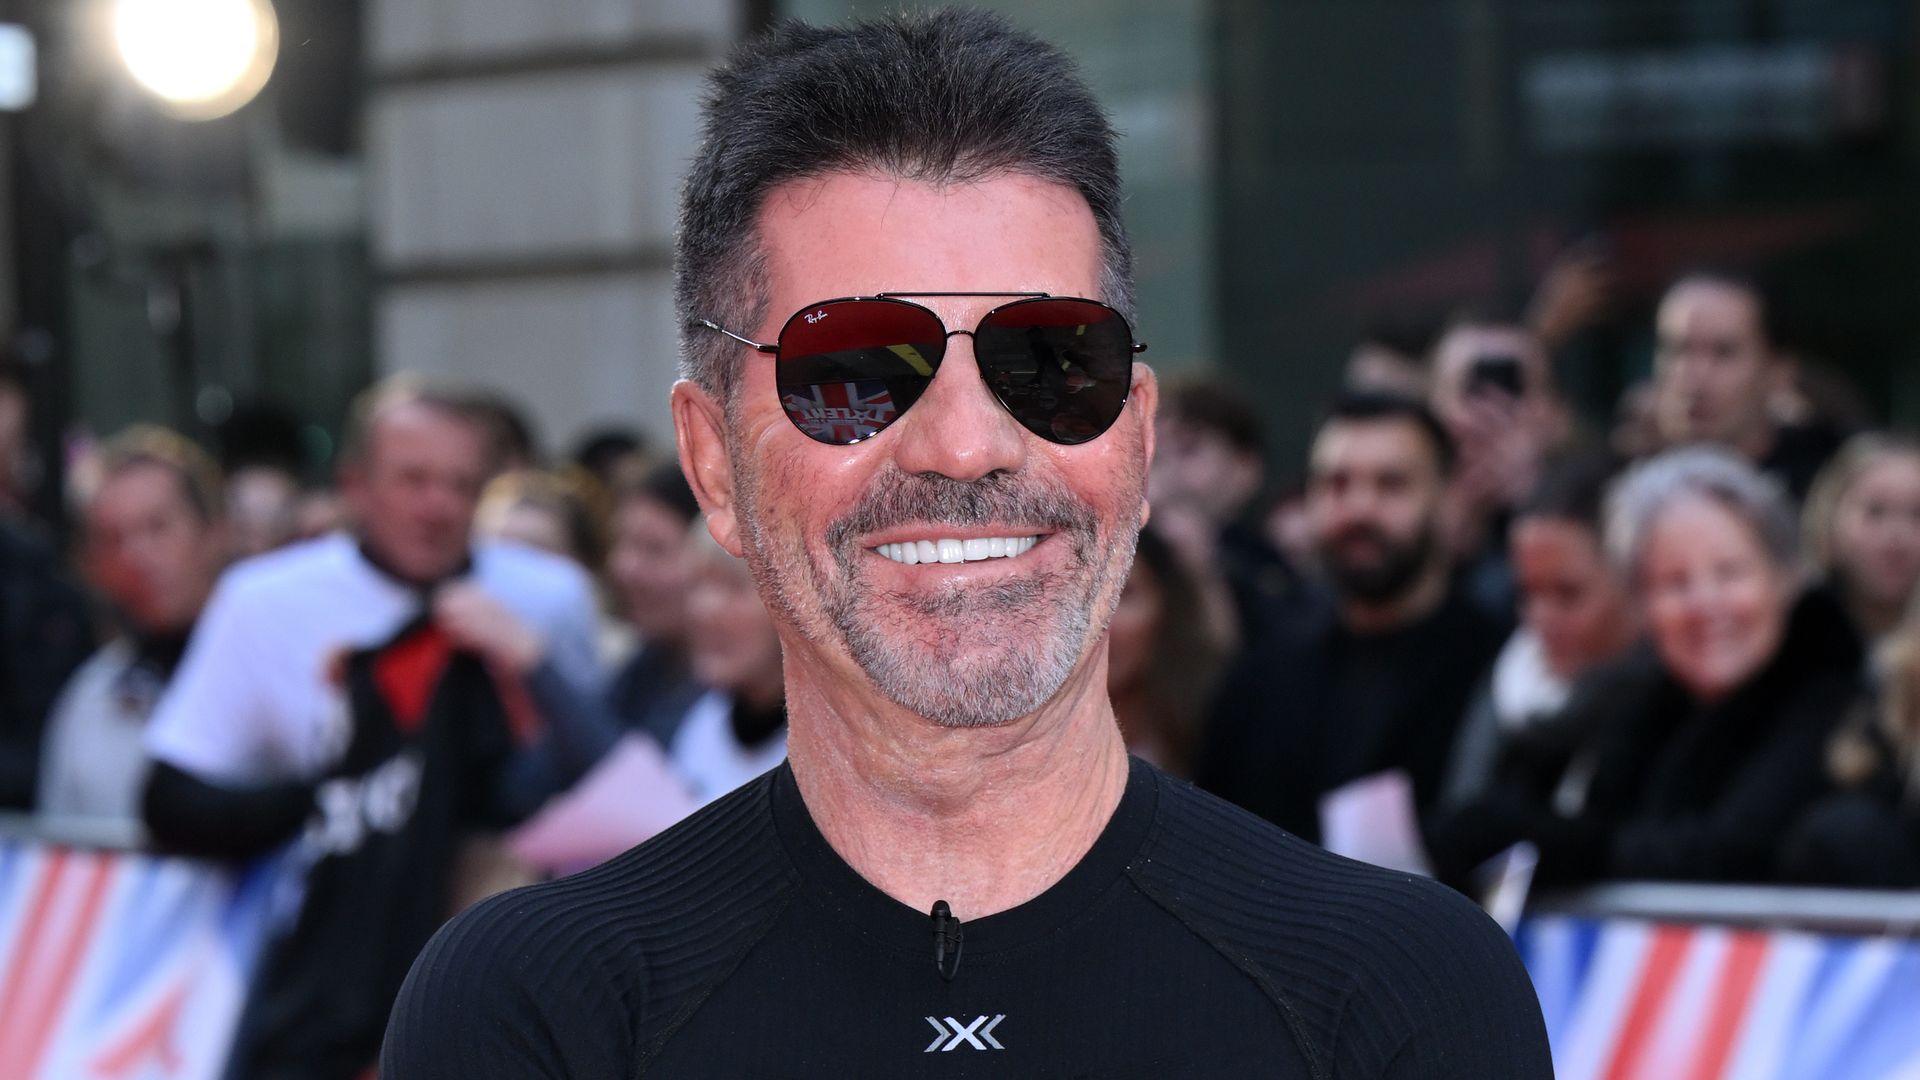 EXCLUSIVE!! It looks as though Simon Cowell has finally completed